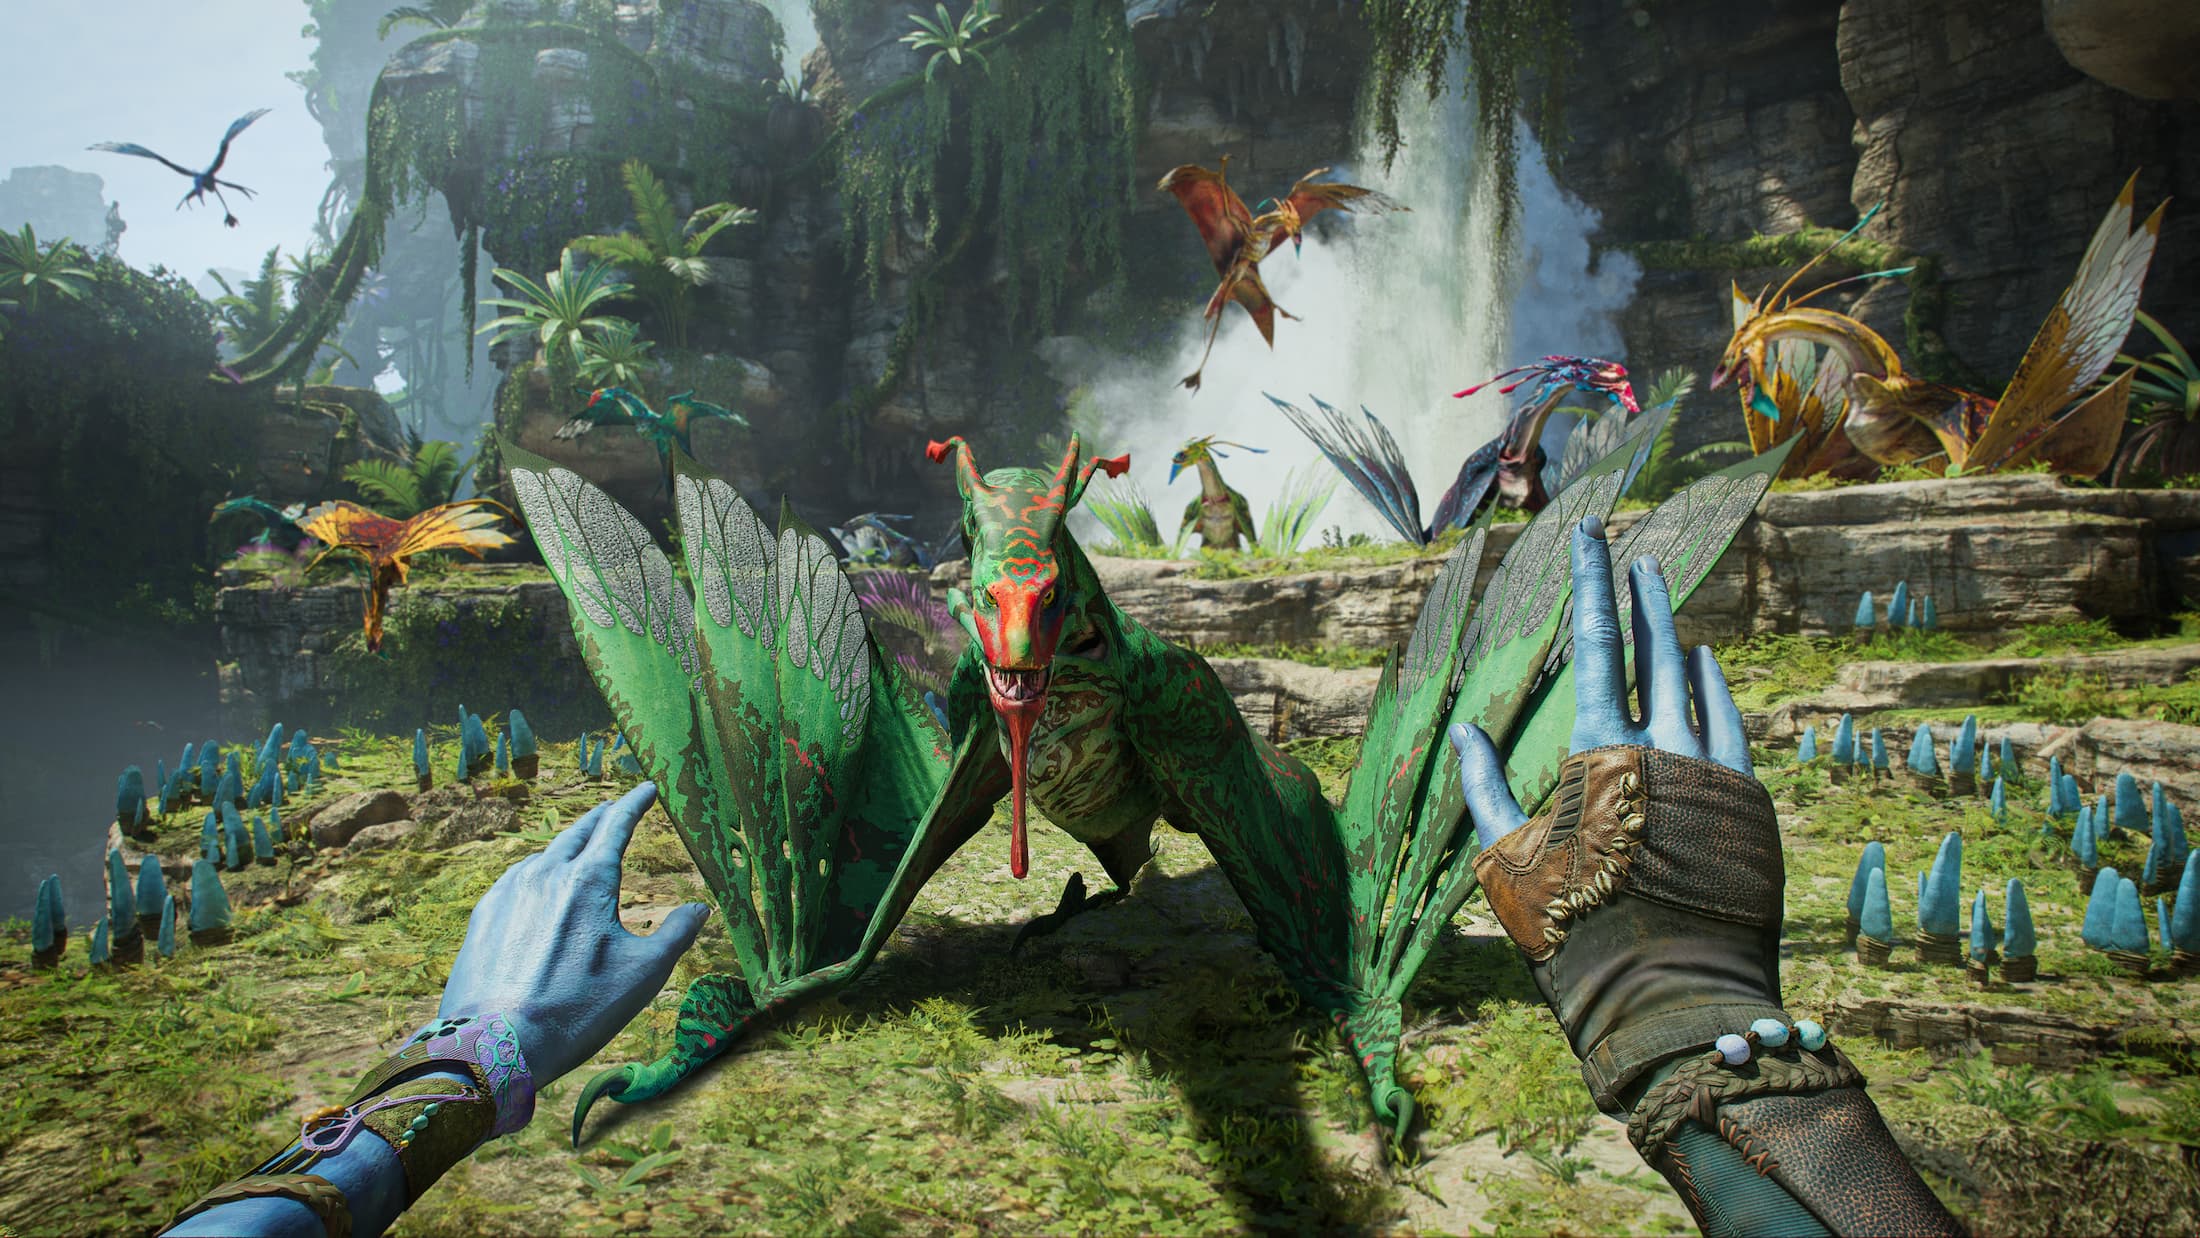 Two blue hands are shown from a first-person perspective.  They appear to be trying to pacify a dragon-like creature in Avatar: The Frontier of Pandora.